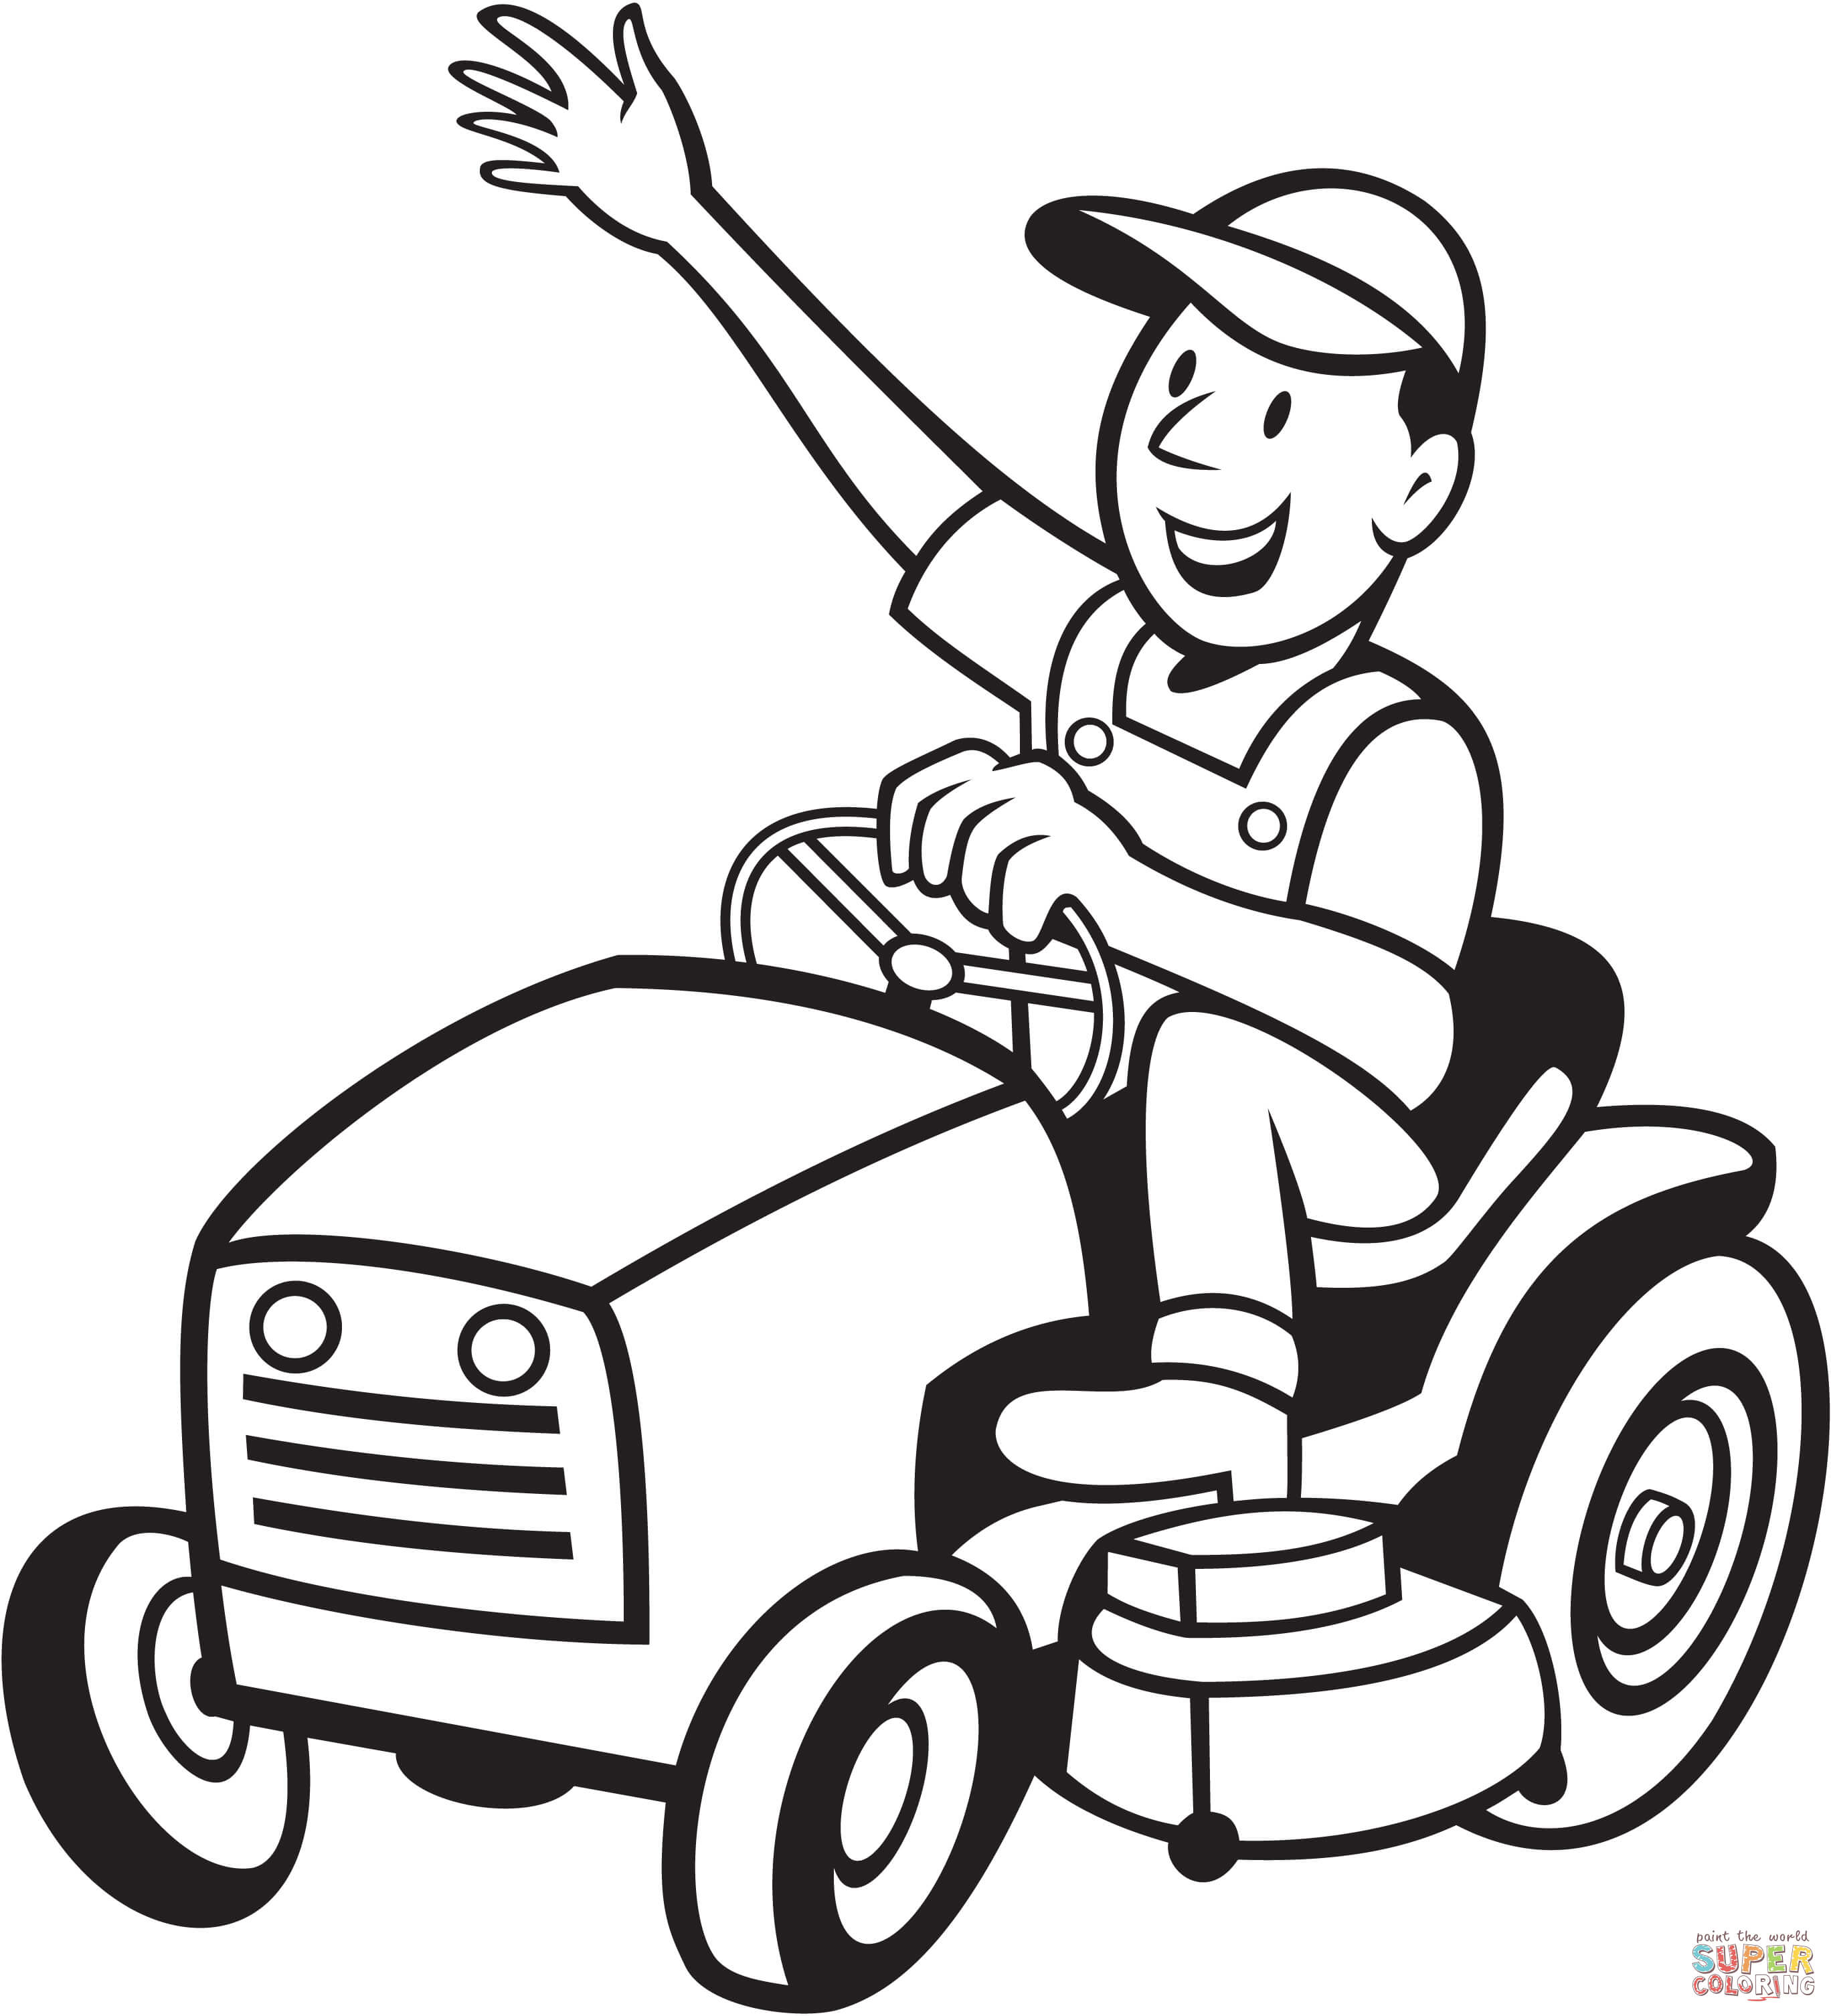 Lawn mower clipart black and white 1 » Clipart Station.